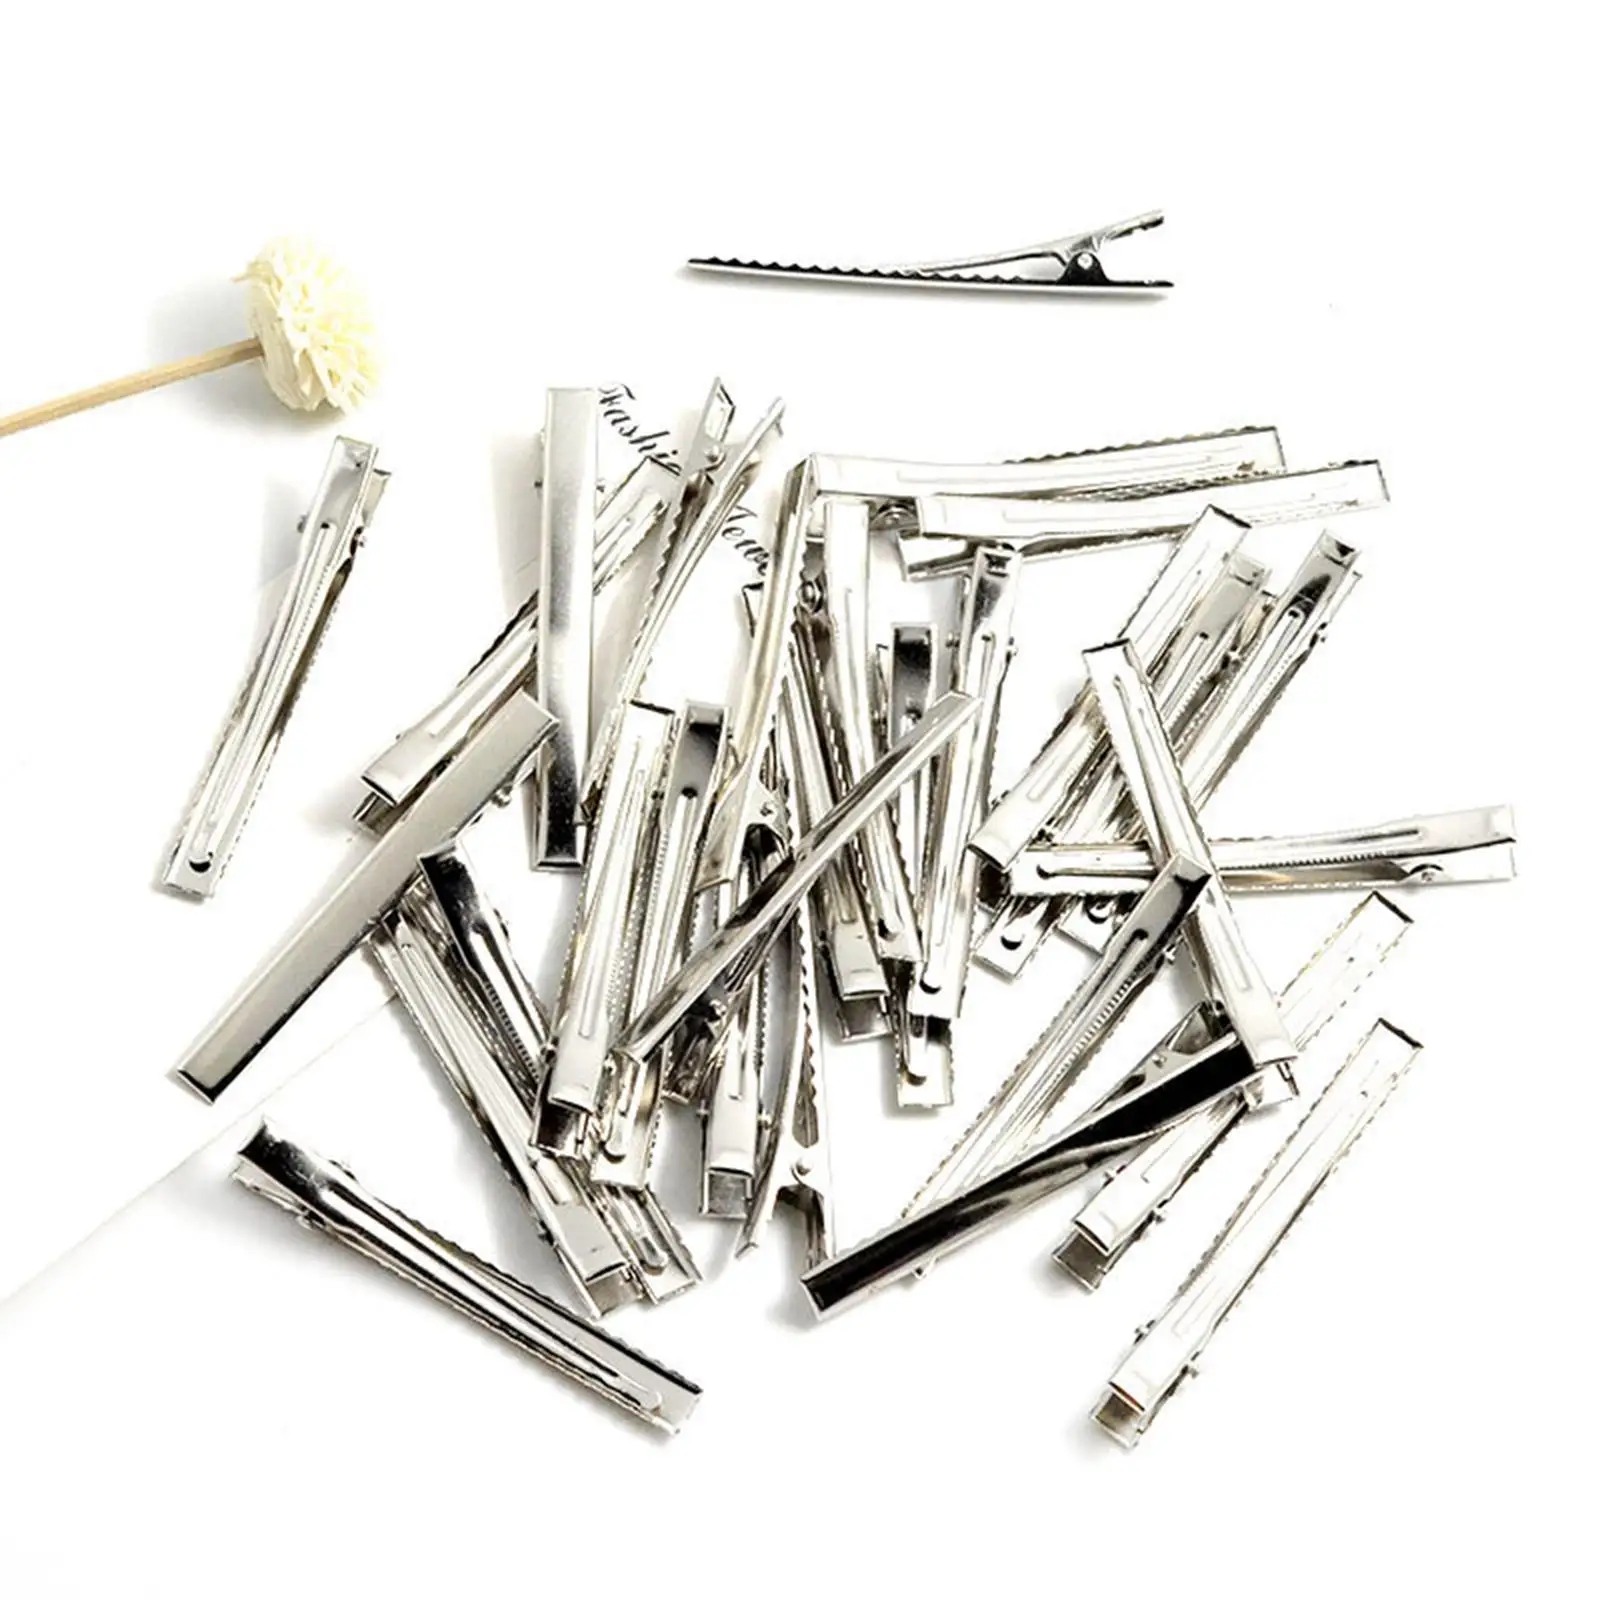 10pcs Hair Clips 75mm Single Prong Alligator Hairpin Teeth Blank Setting Accessories for Jewelry Making DIY Hair Clip